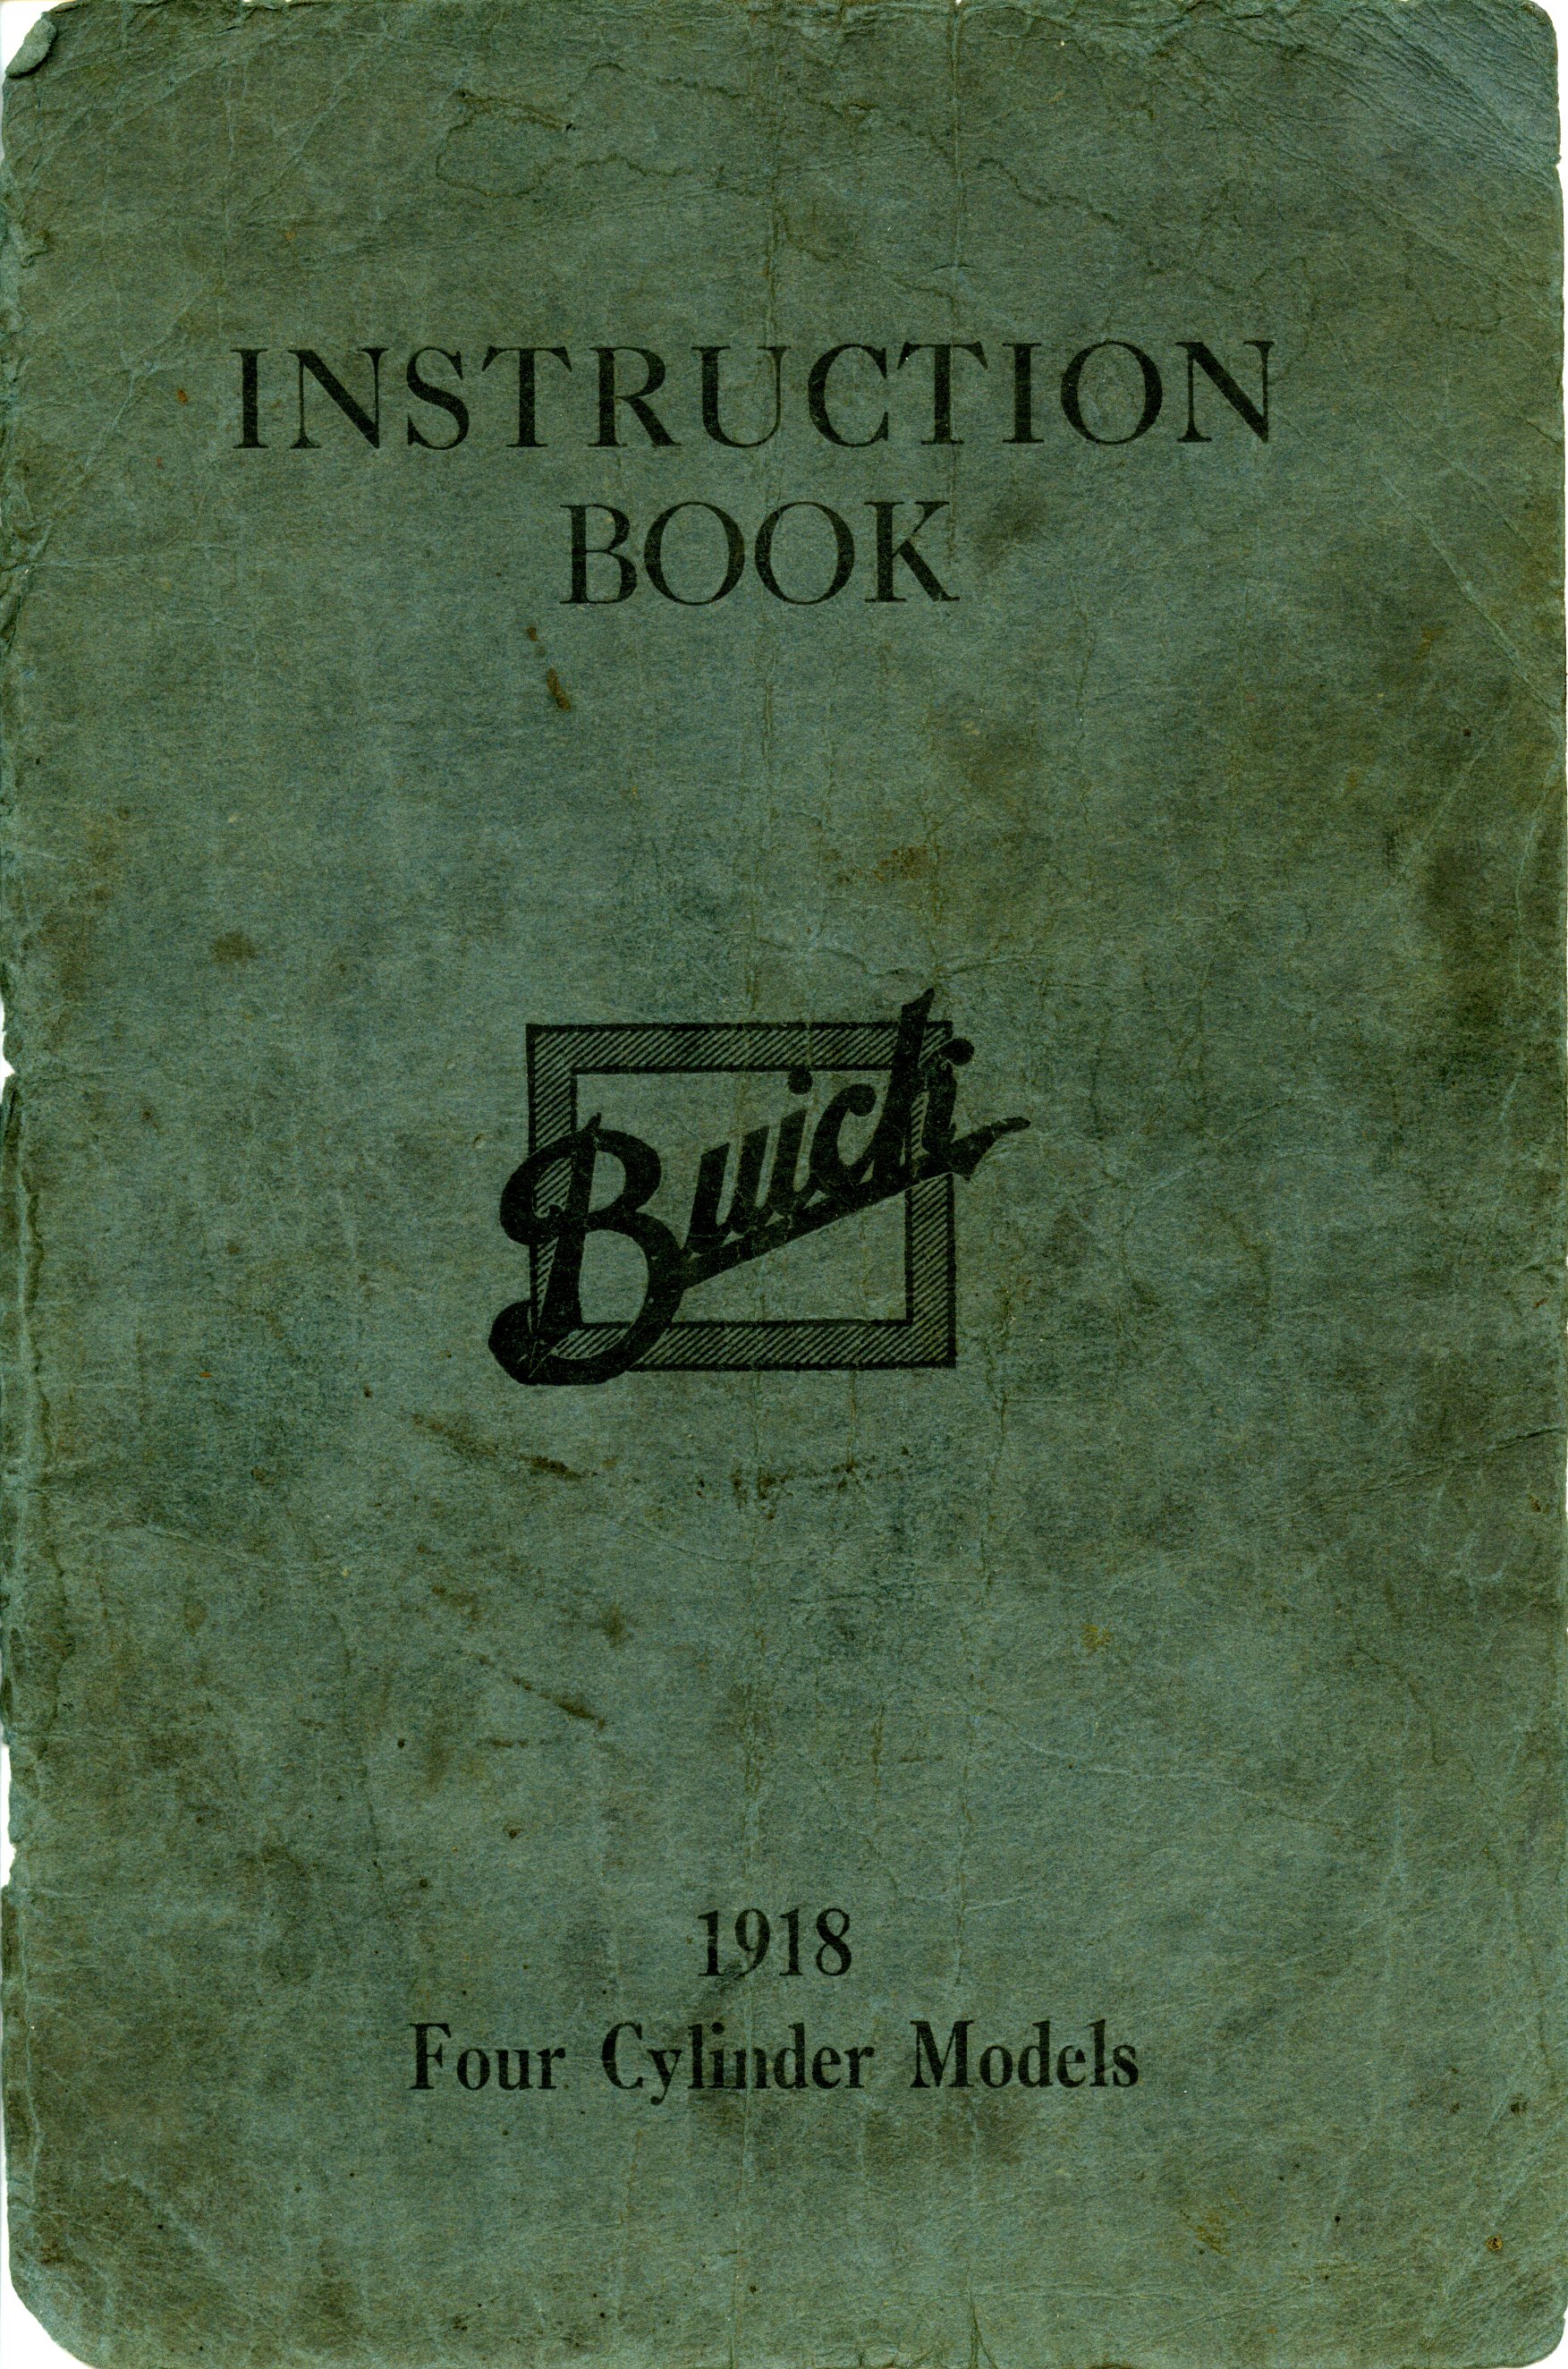 1918 Buick Instruction Book-4 Cyl-00